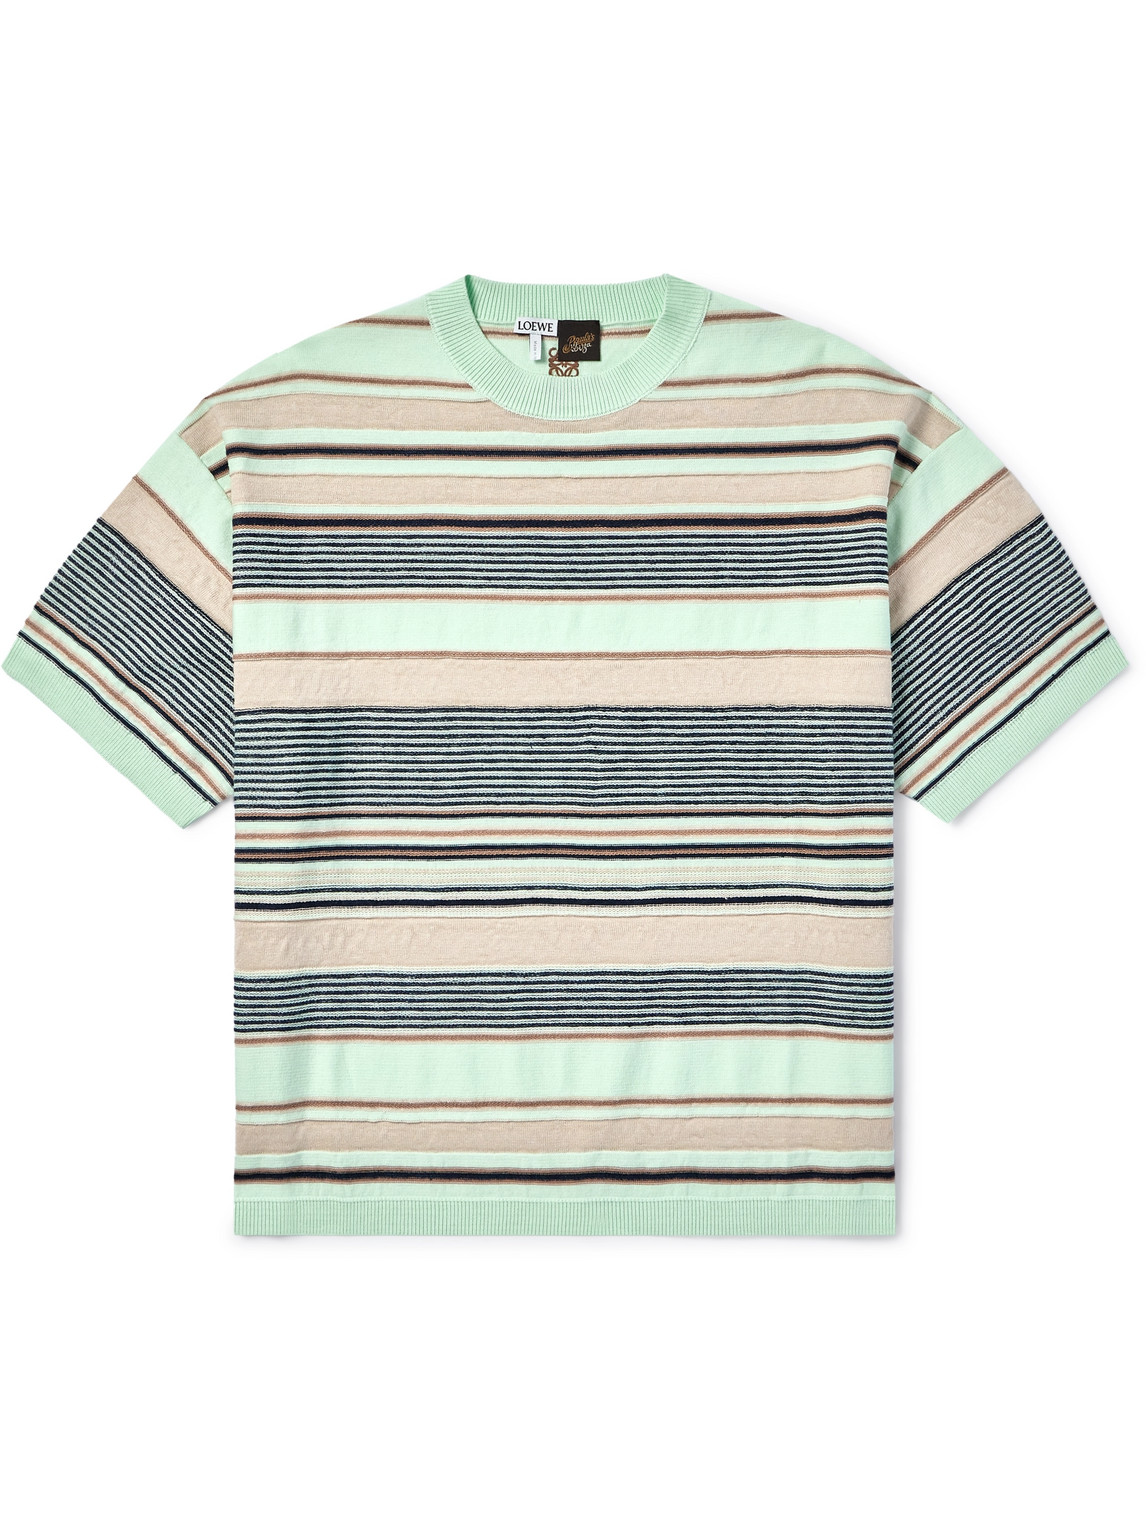 Loewe Striped Cotton And Linen T-shirt In White